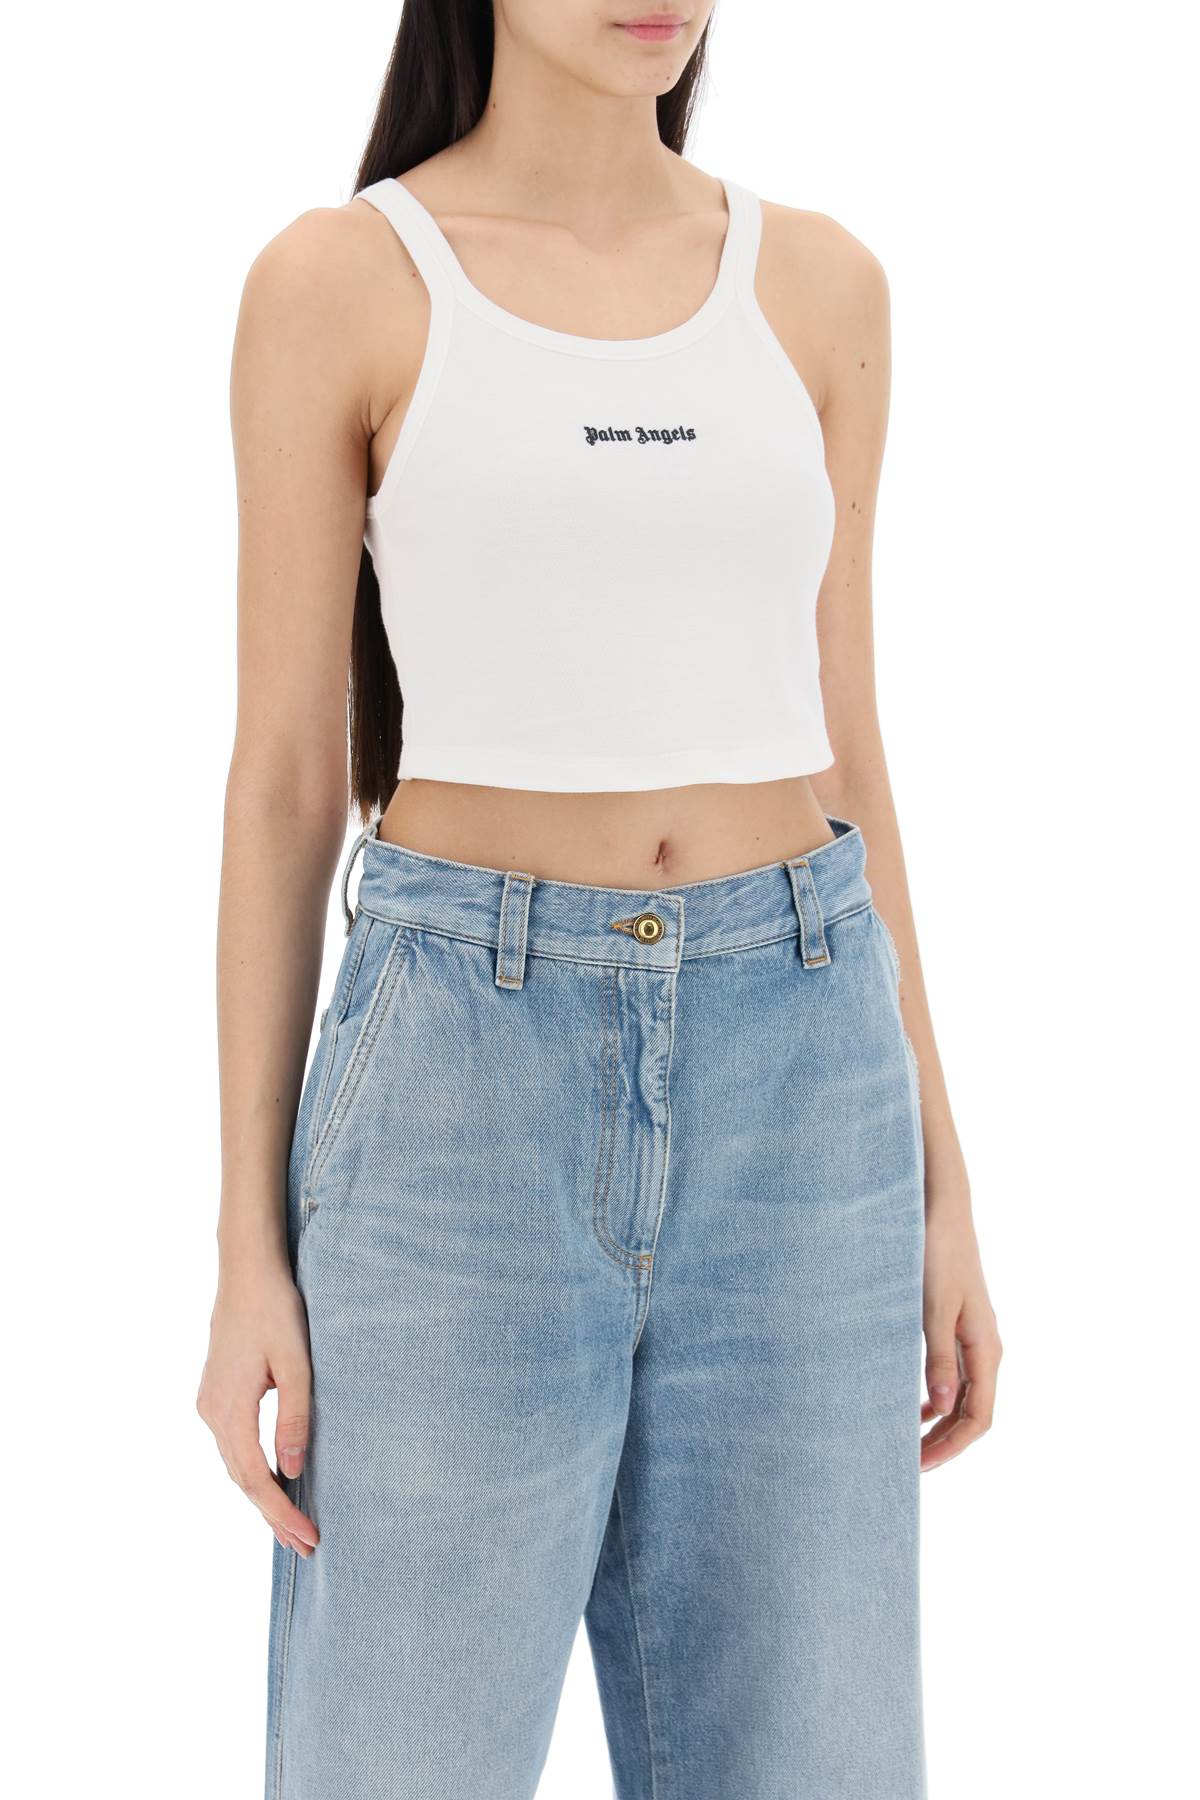 Palm angels embroidered logo crop top with-1